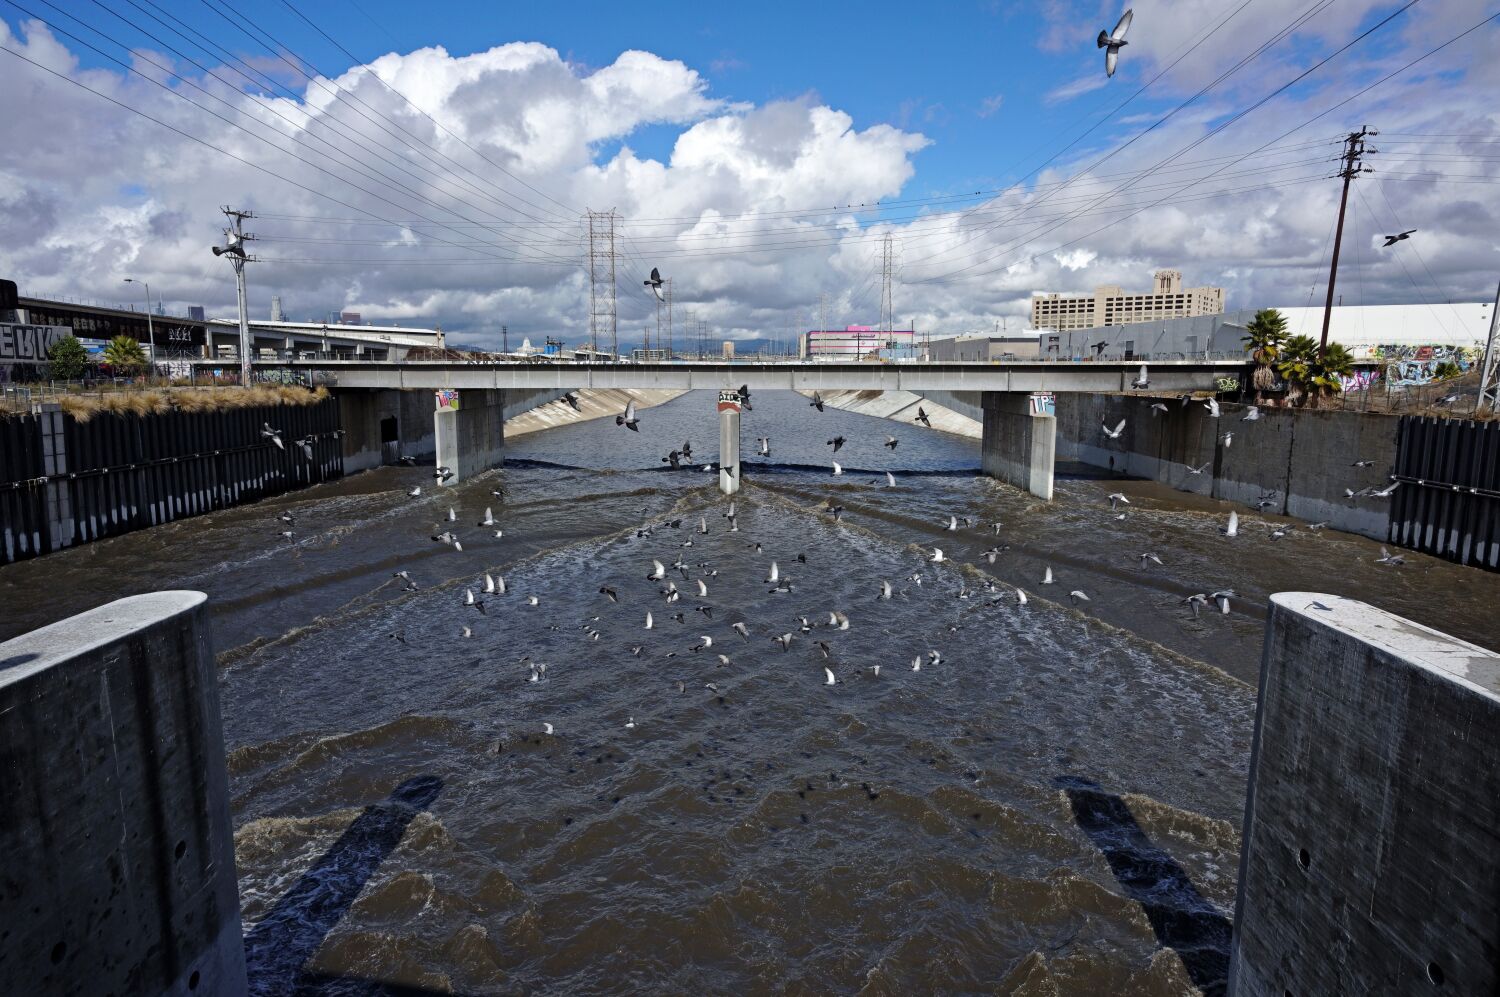 Los Angeles County seeks flood control improvements in face of climate change